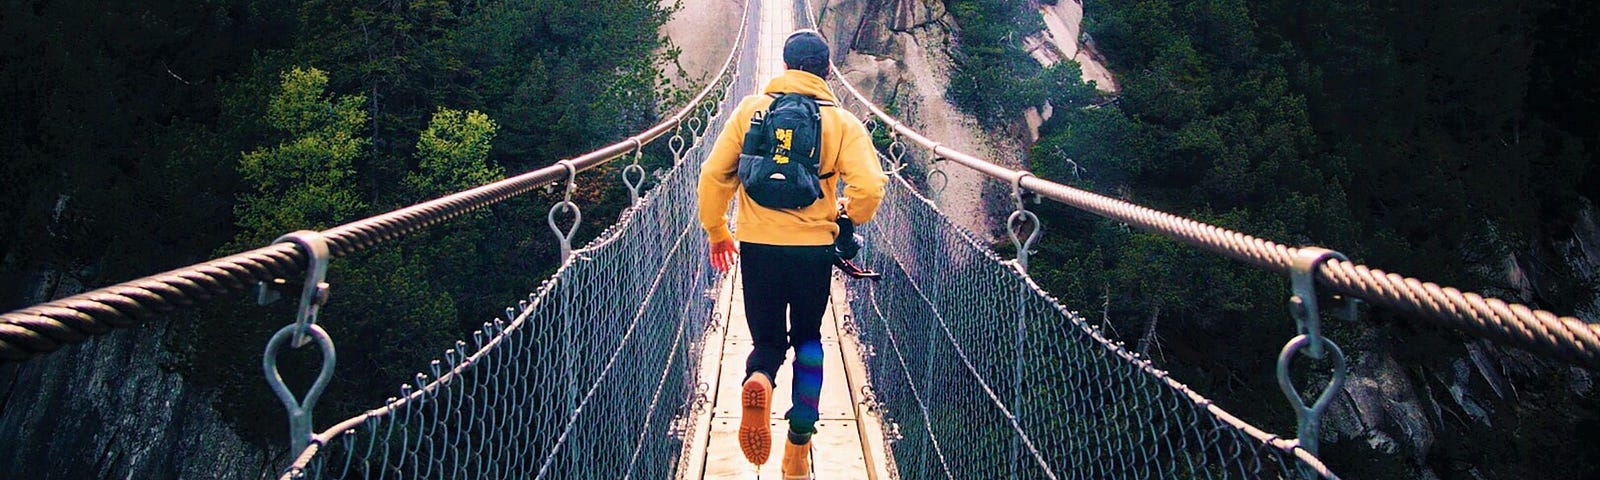 back view of man wearing yellow jacket and backpack running across suspension bridge